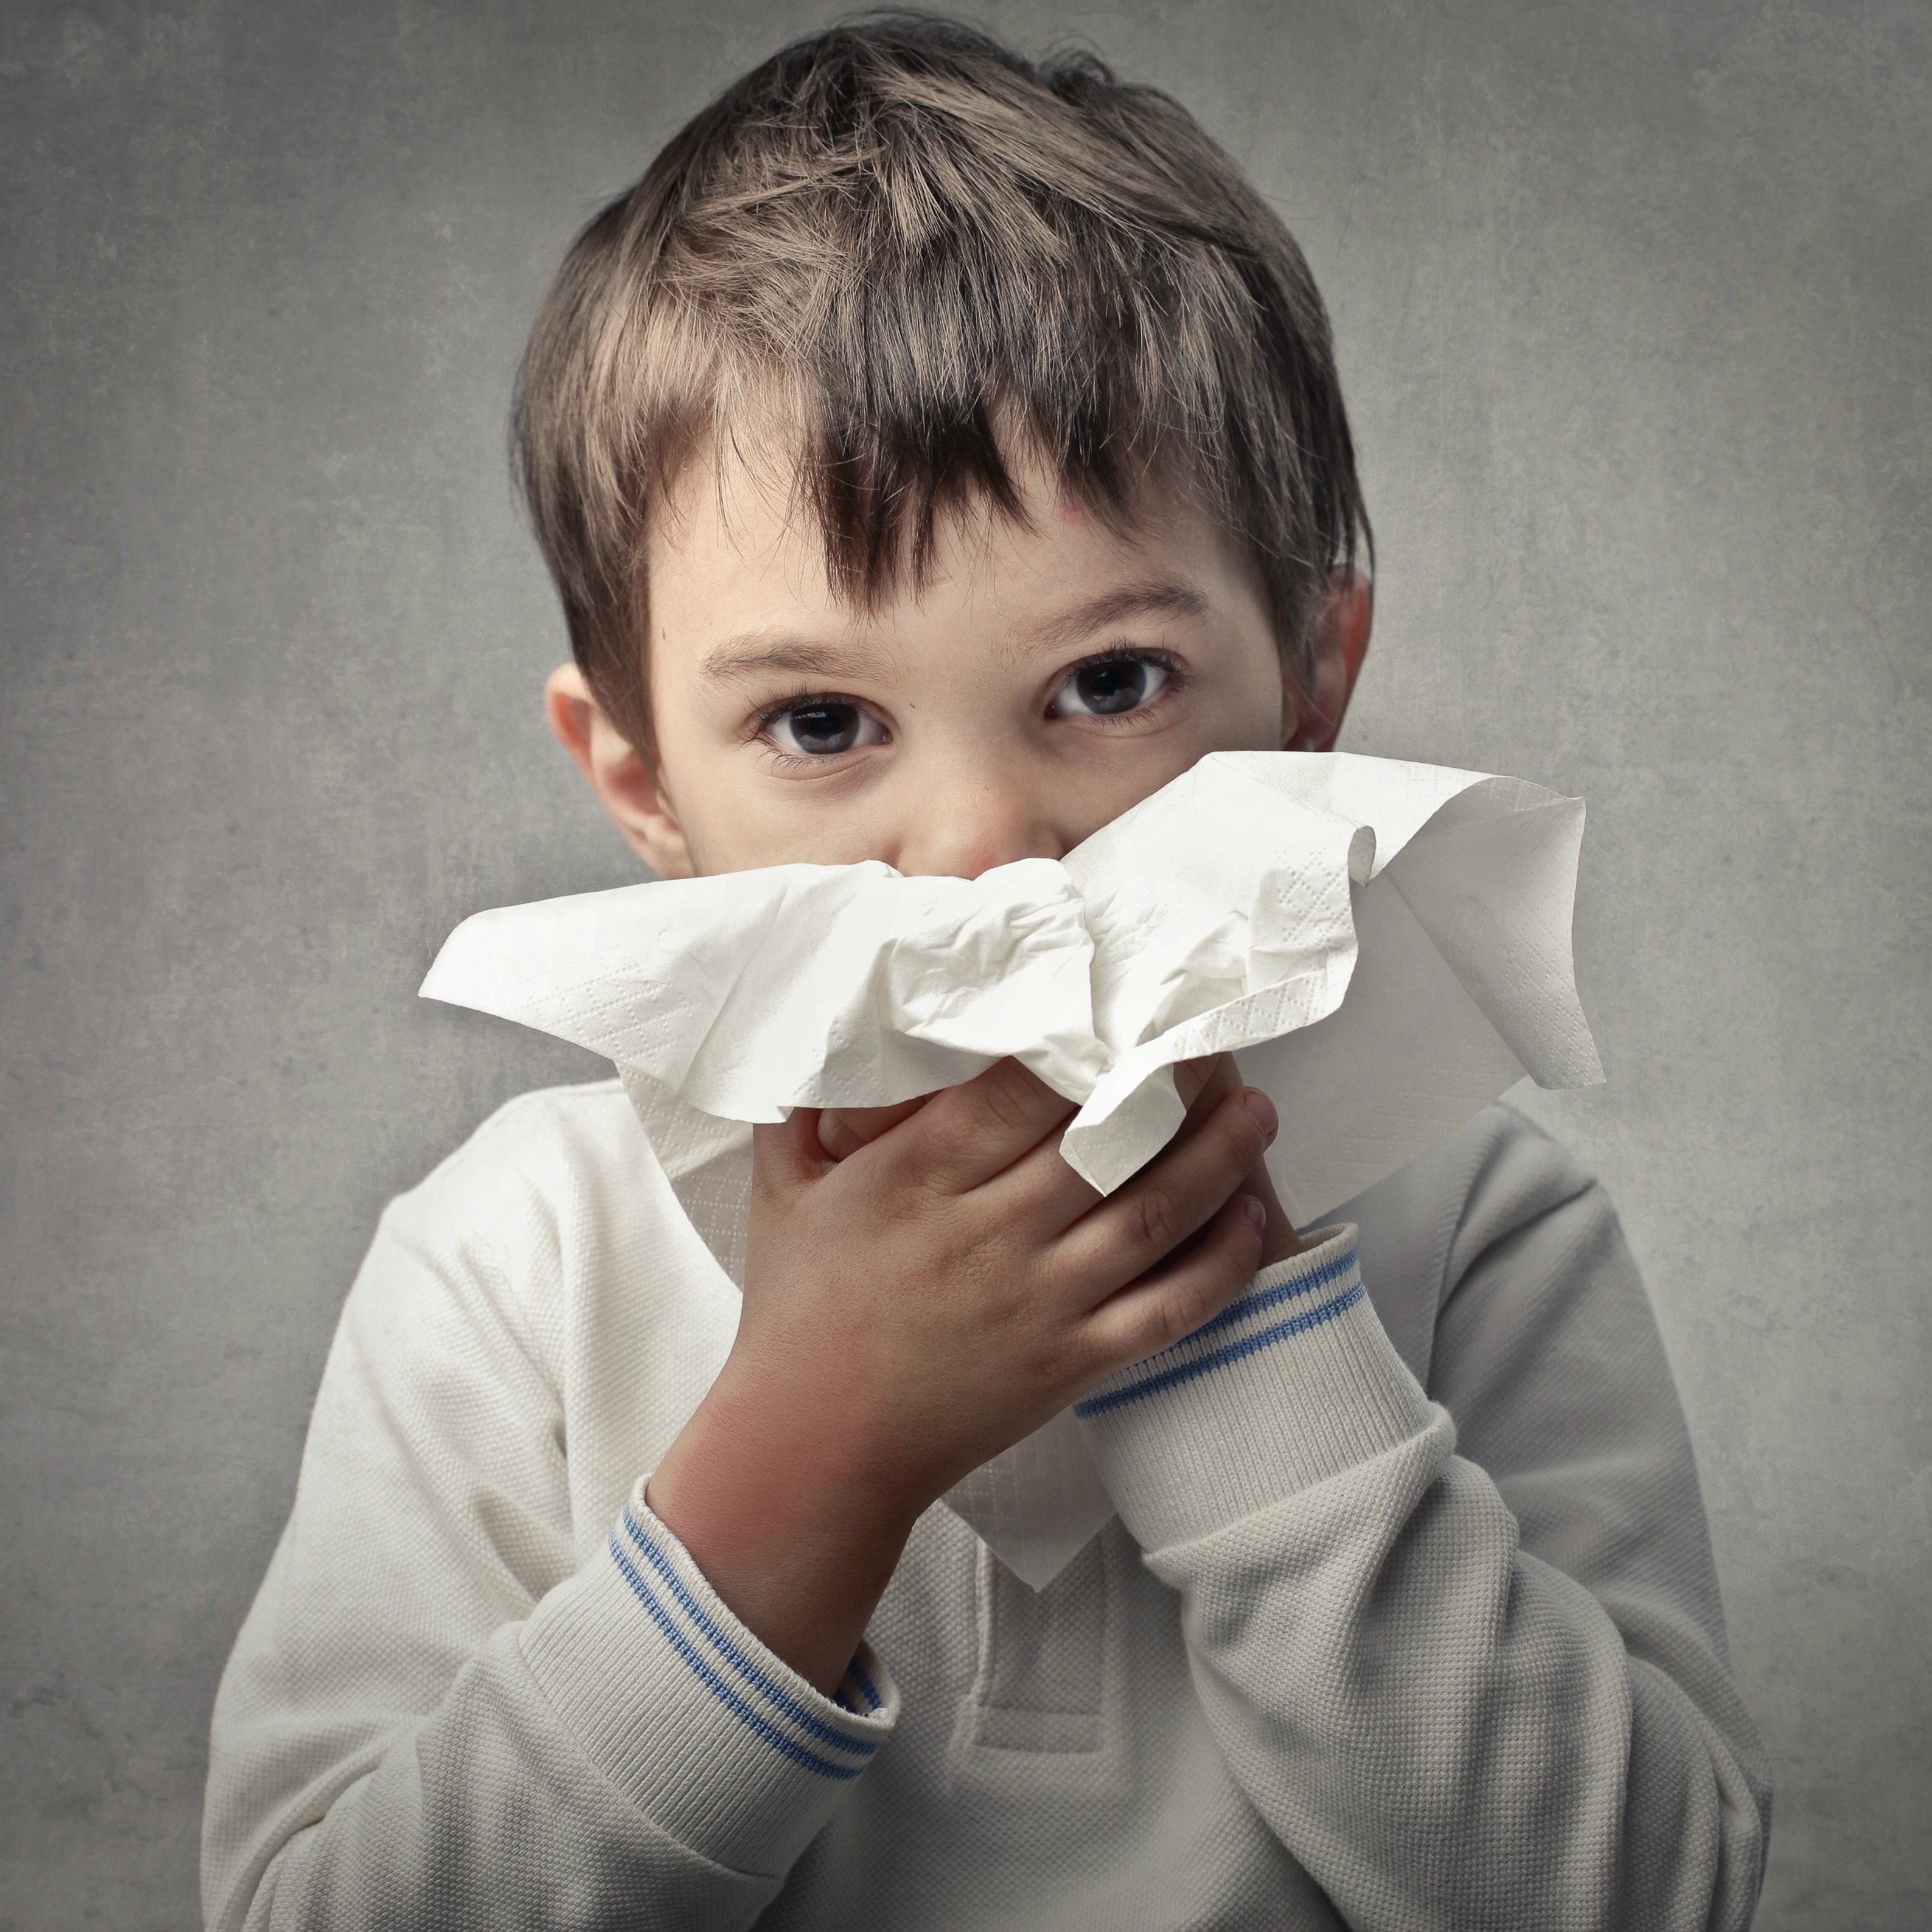 The Overlooked Sign Your Kid’s About to Get Sick